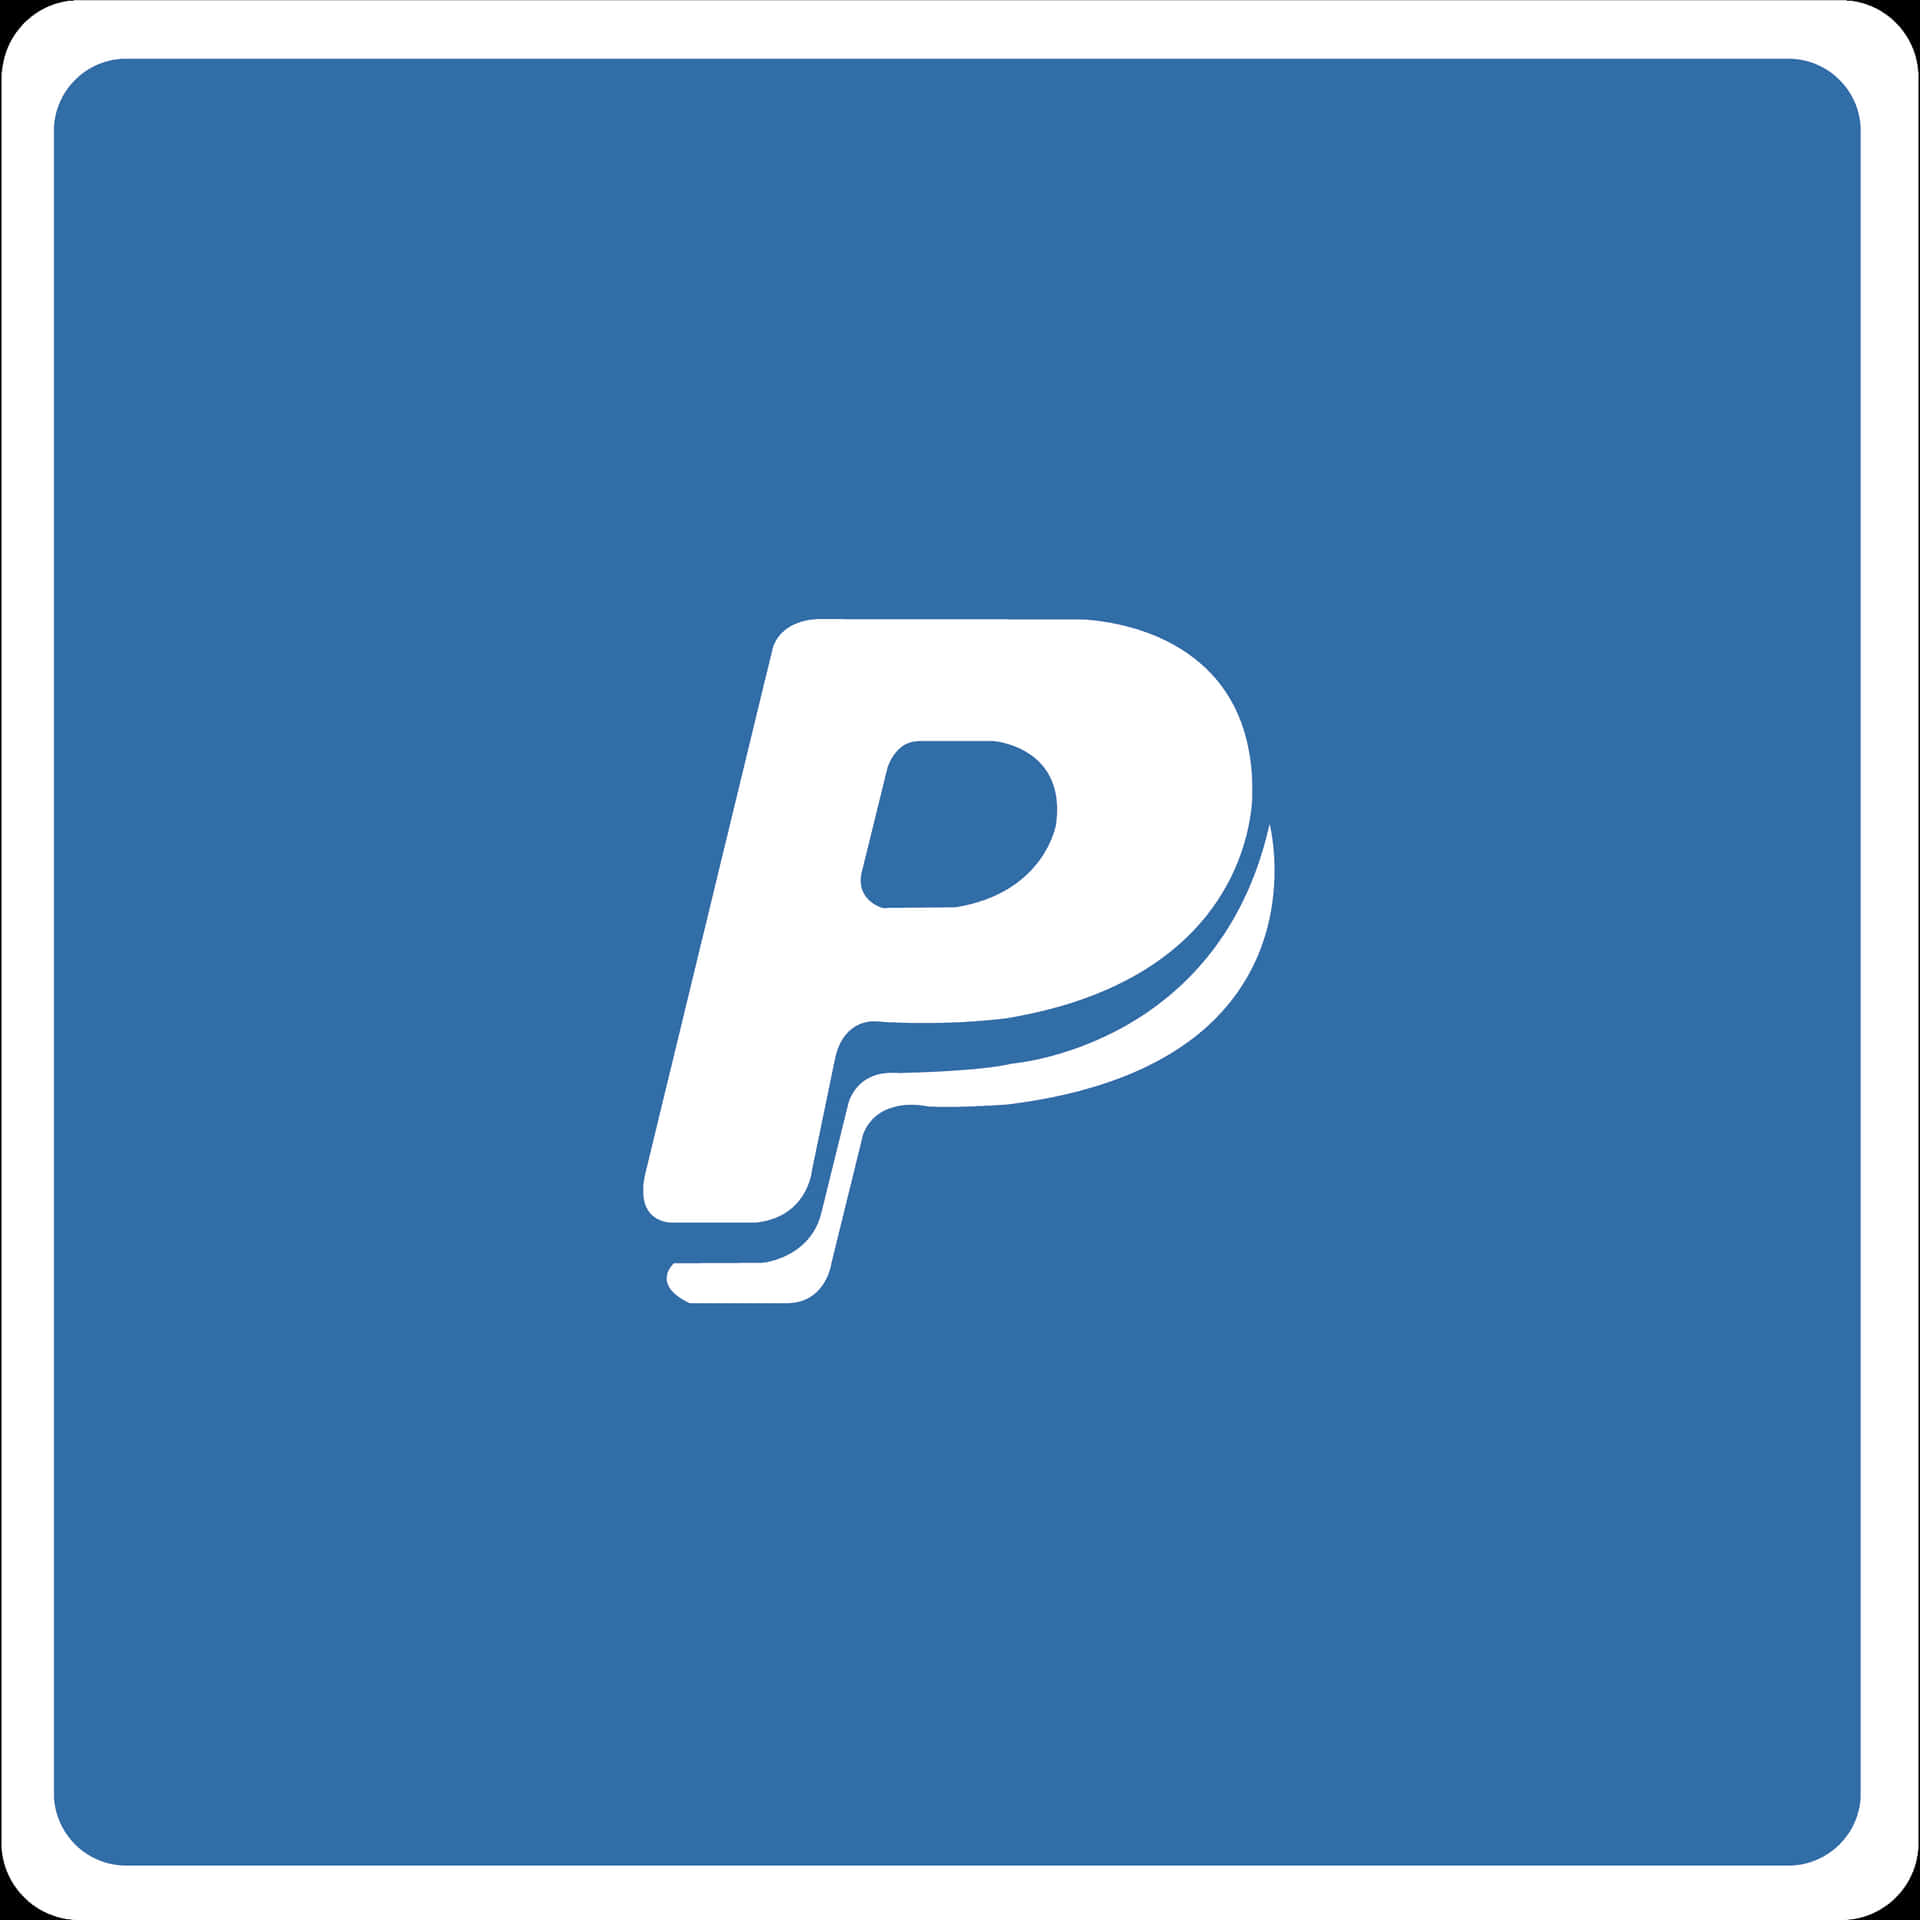 The Paypal Logo In Blue And White